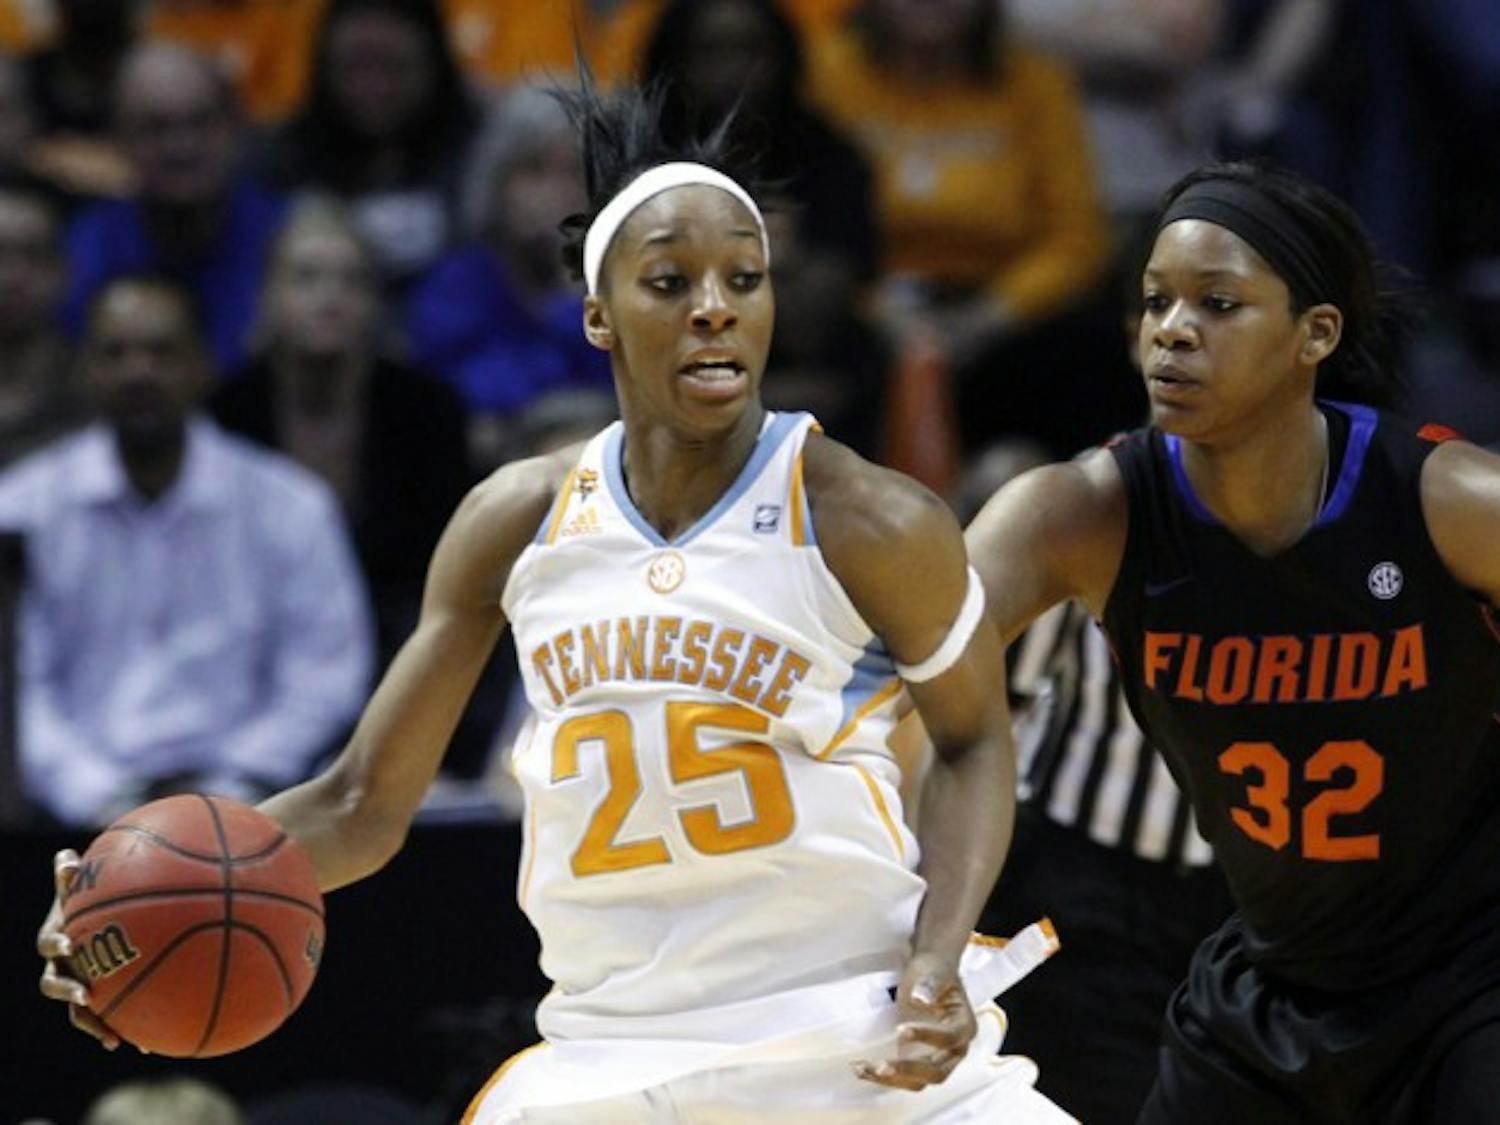 &nbsp;Florida forward Jennifer George (32) recorded her SEC-leading 14th double-double in Sunday’s 75-59 loss to Tennessee, but it wasn’t enough as Vols forward Glory Johnson (25) scored 21 to propel UT.